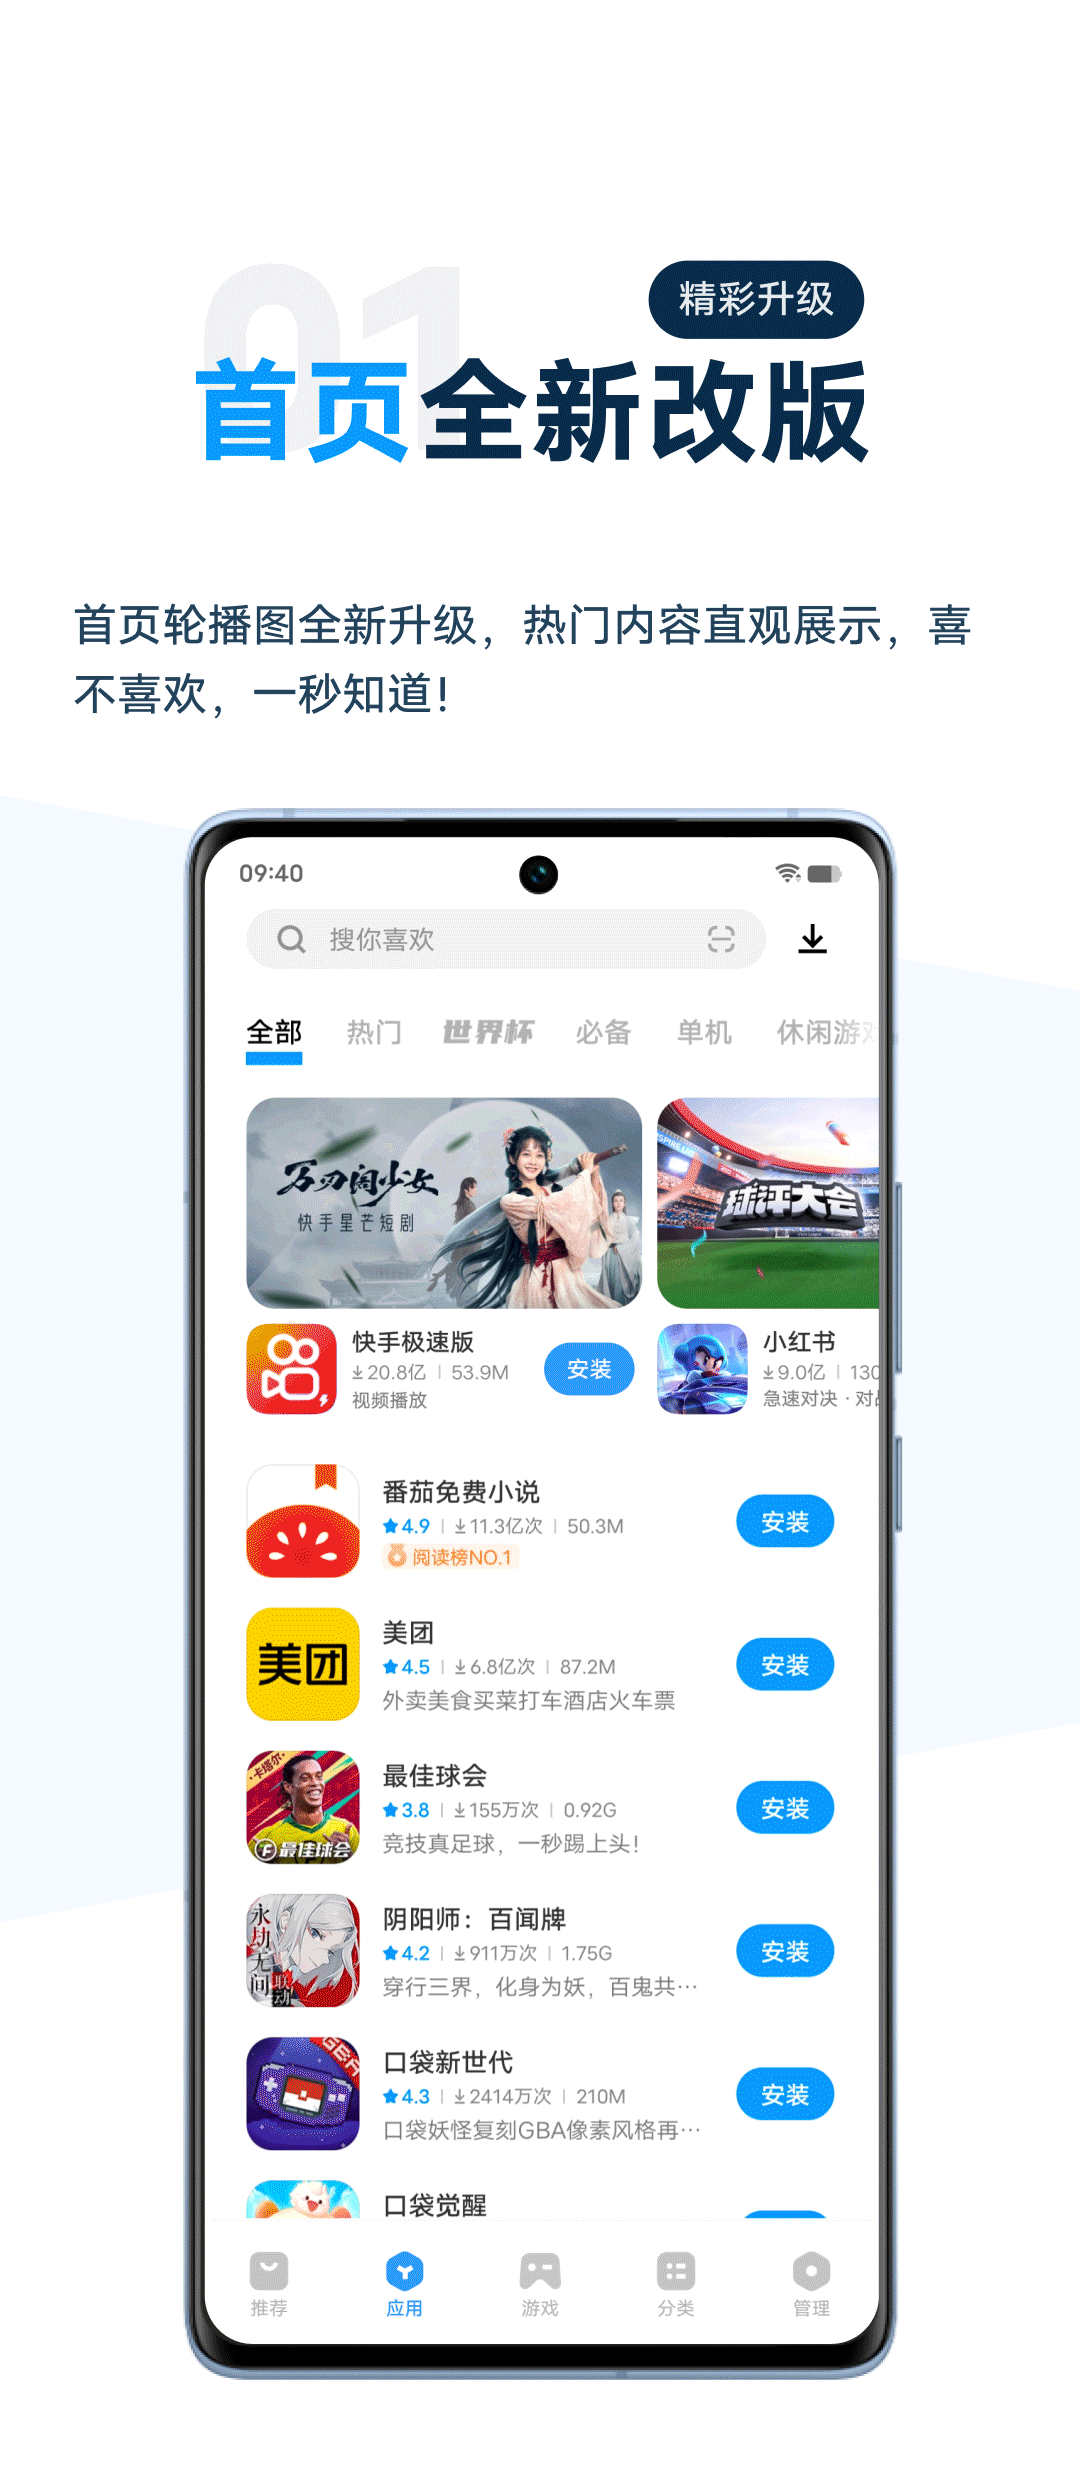 Vivo App Store version 9.0 adds 5 new traffic scenarios, and the UI is completely updated